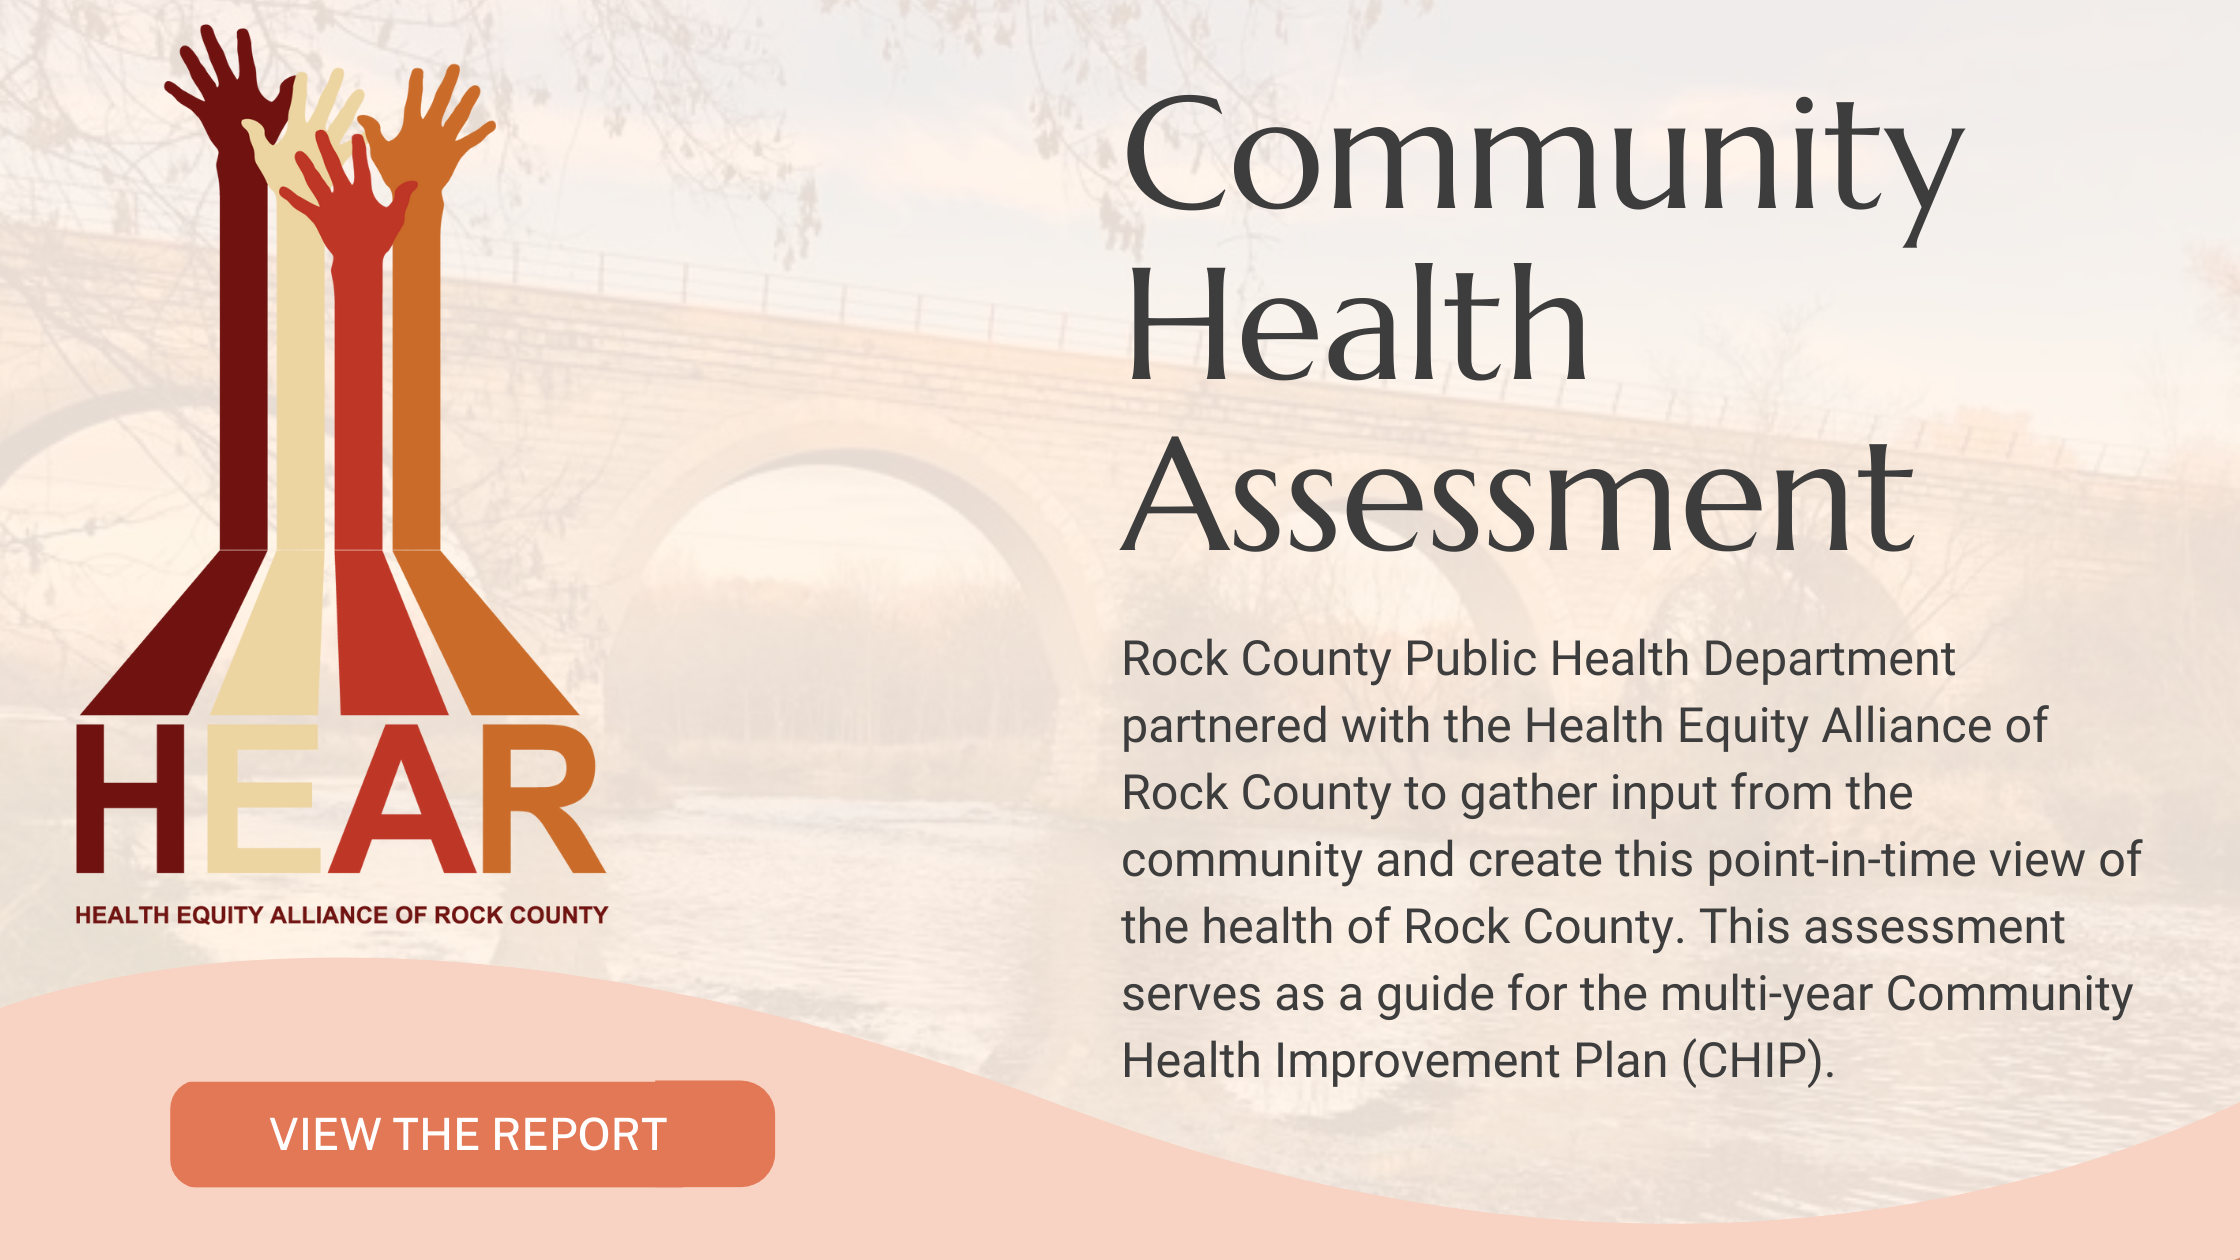 Health Equity of Rock County logo; text: Community Health Assessment - Rock County Public Health Department partnered with the Health Equity Alliance of Rock County to gather input from the community and create this point-in-time view of the health of Rock County. This assessment serves as a guide for the multi-year Community Health Improvement Plan (CHIP).; Link to Community Health Assessment report 